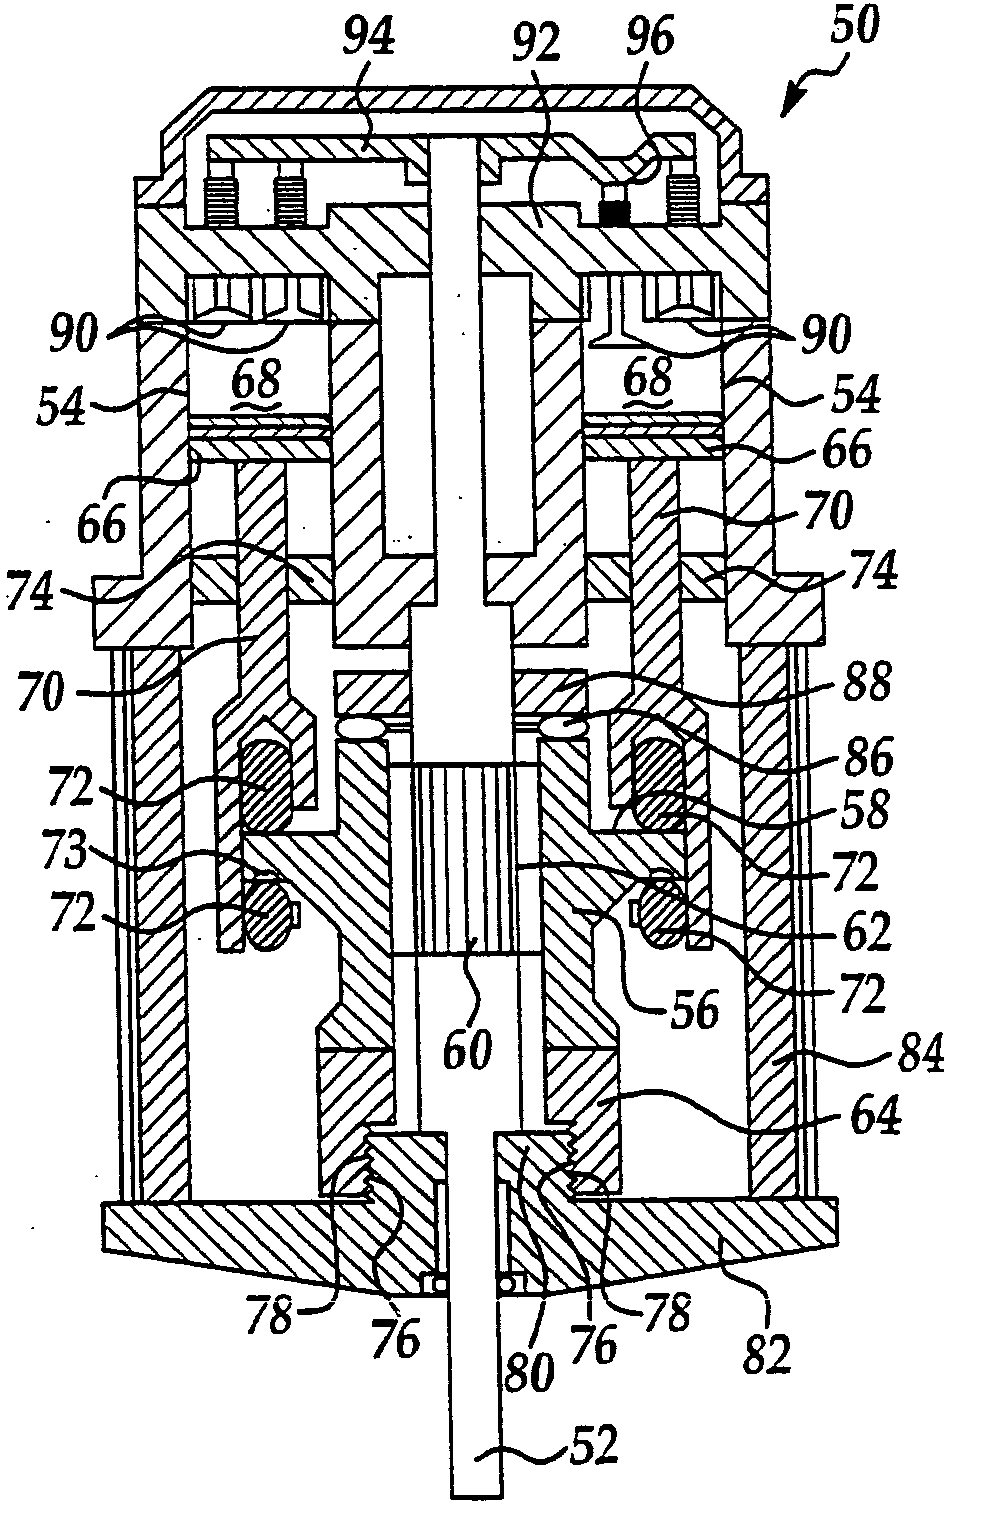 Homogeneous charge compression ignition and barrel engines